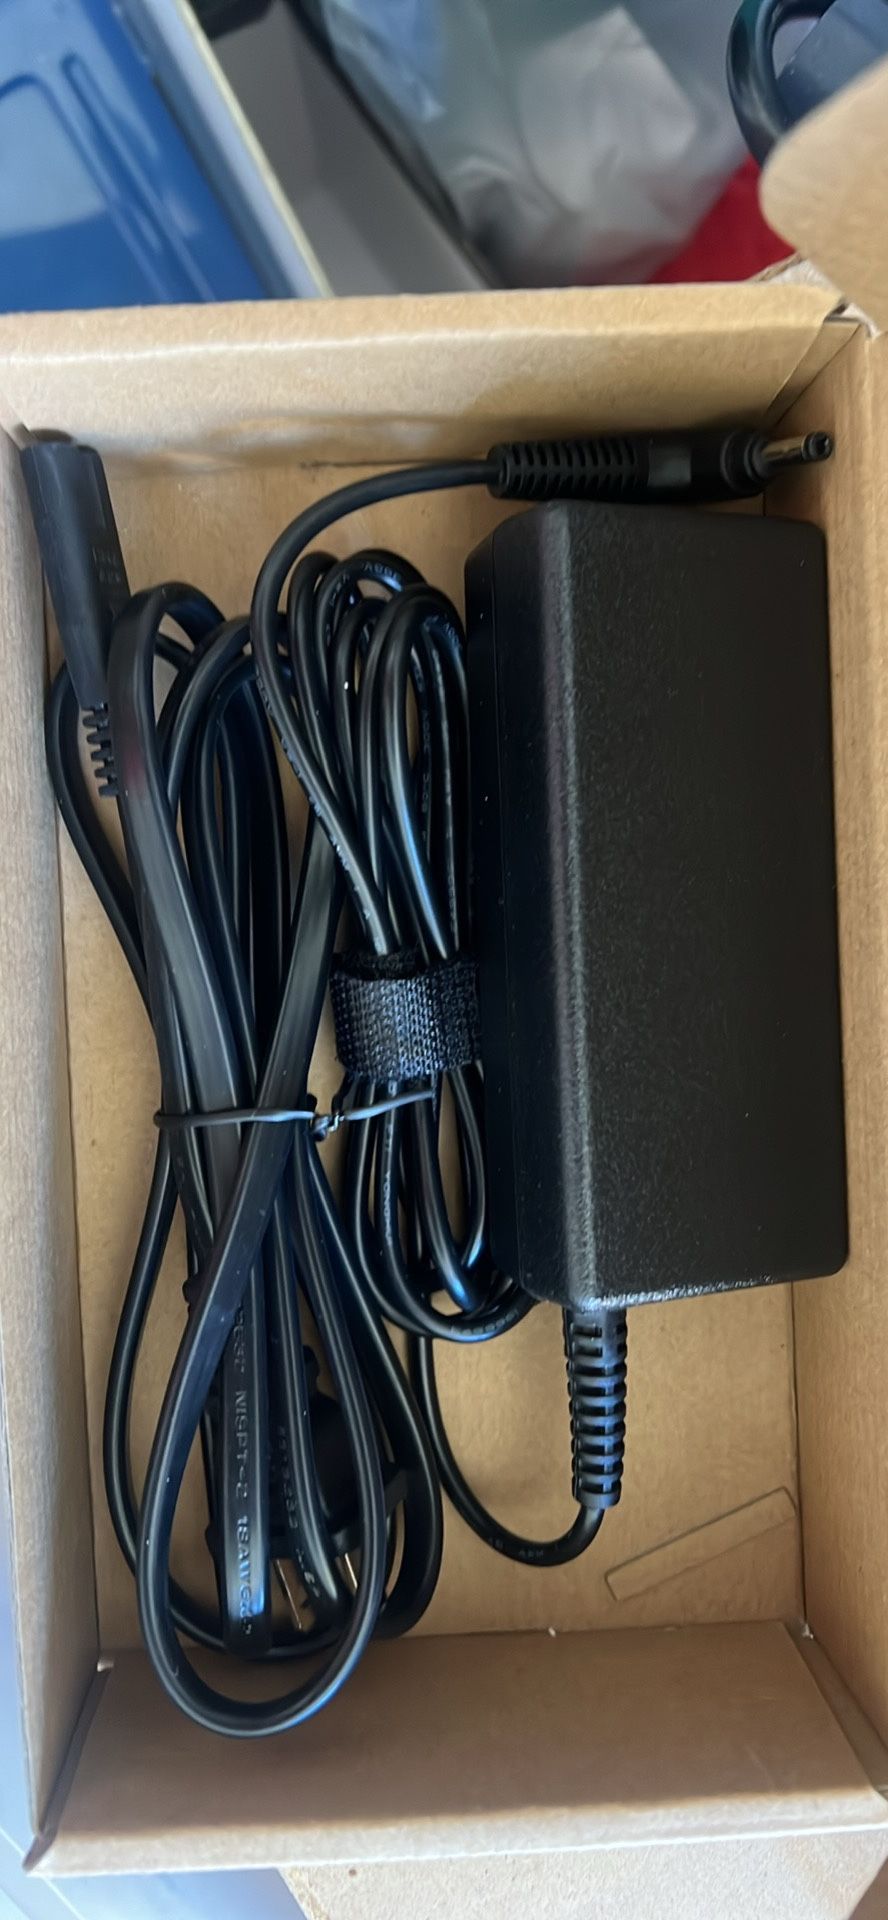 Lenovo laptop chargers 